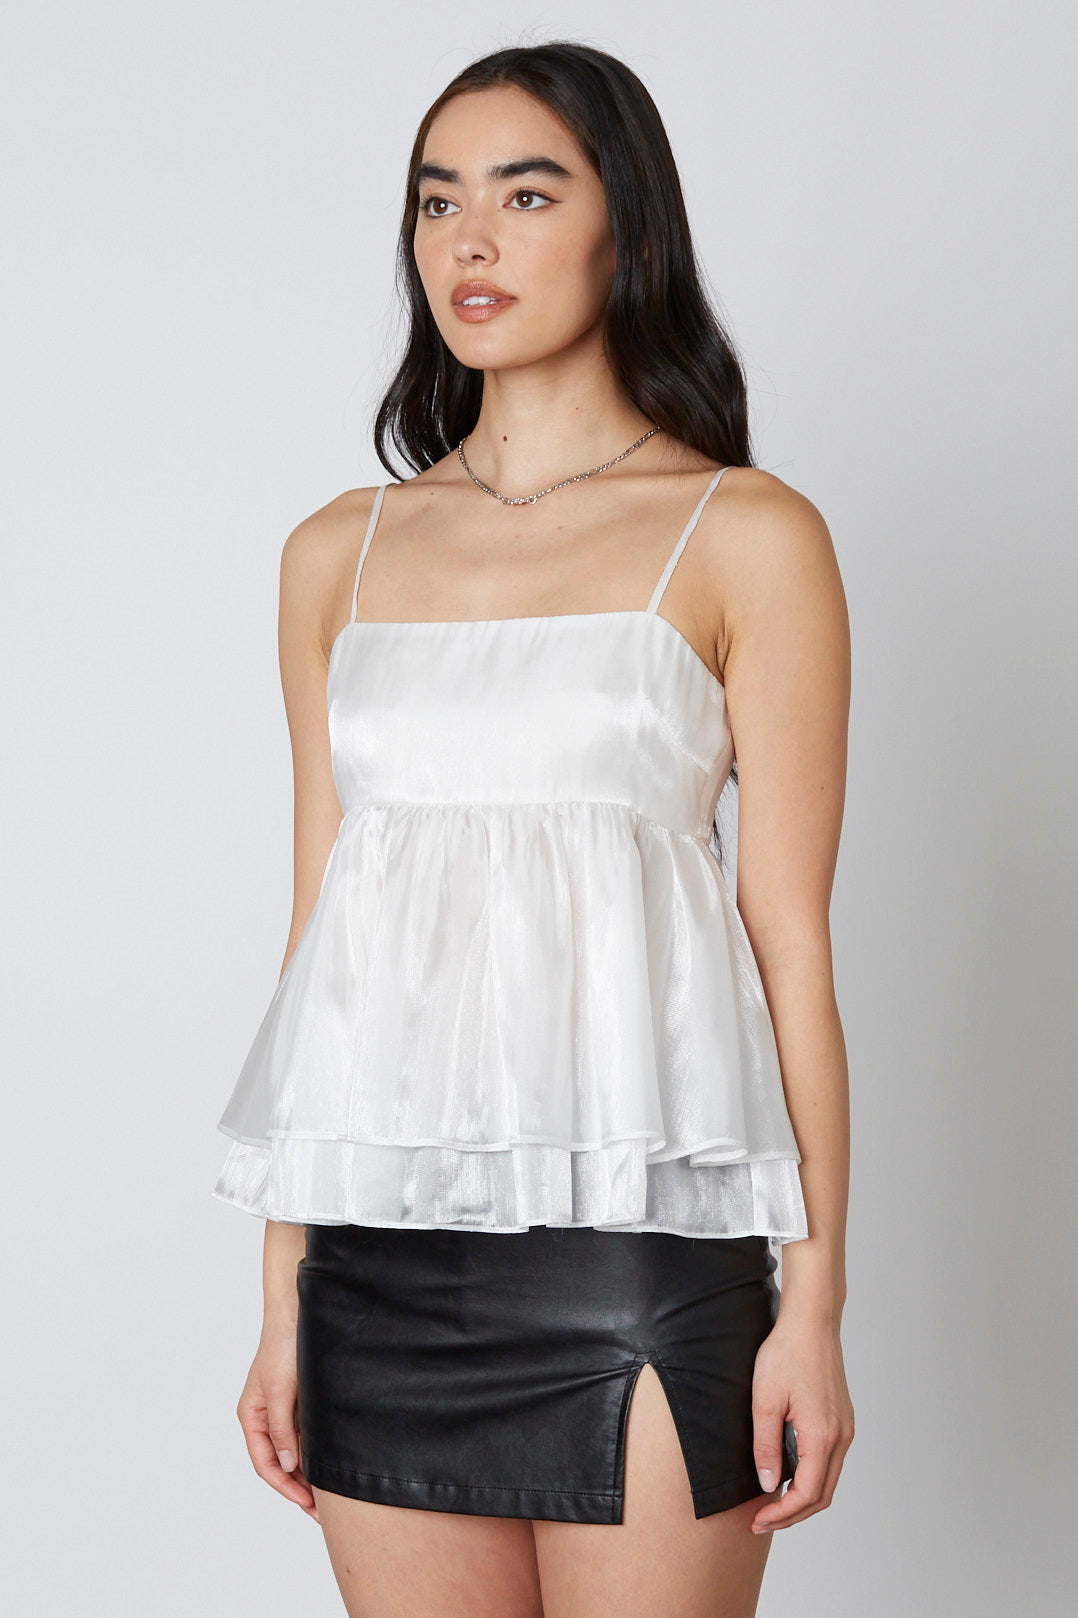 Organza Babydoll Top in White Side